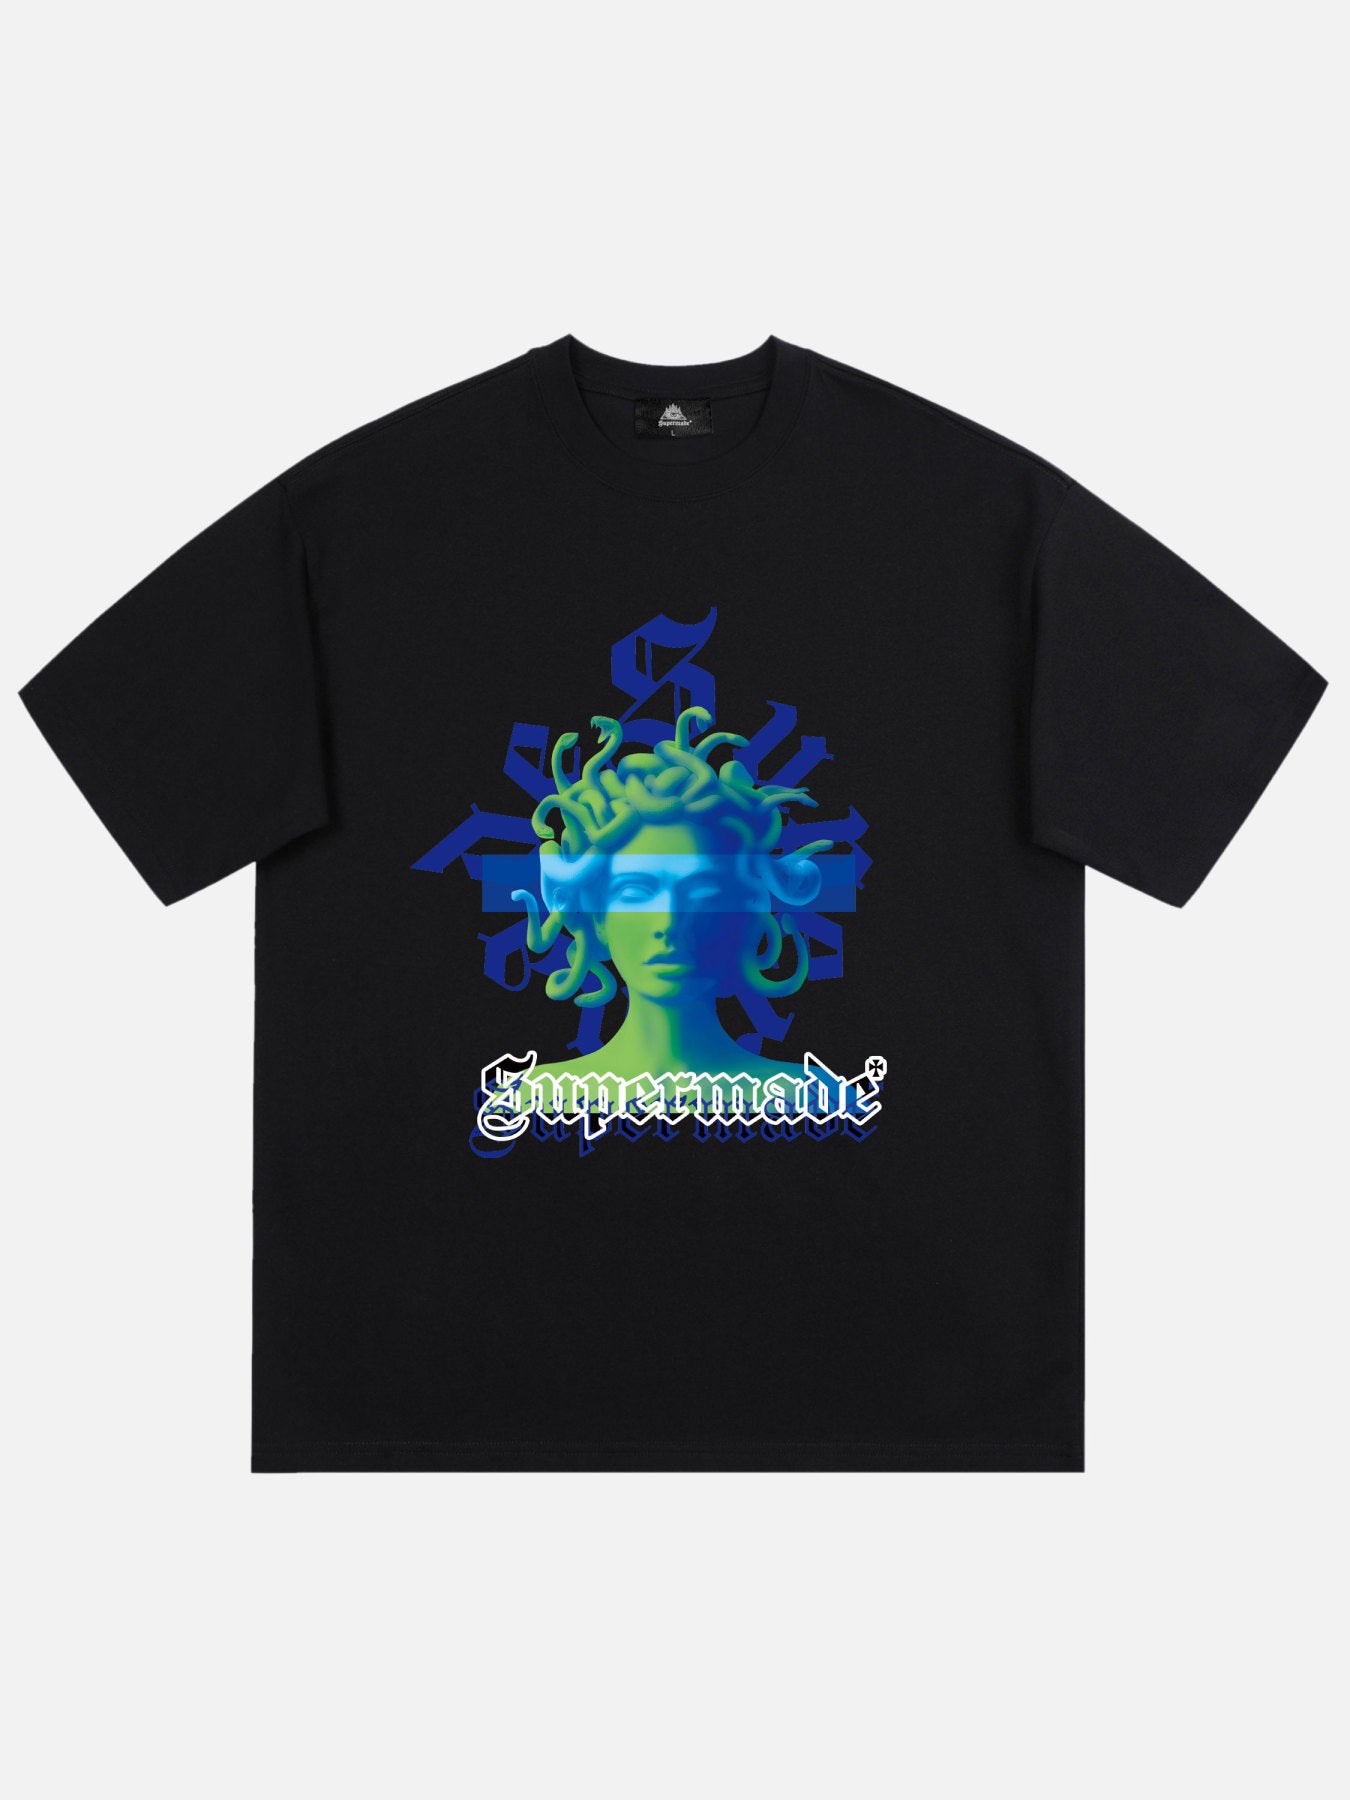 The Supermade Print T-shirt